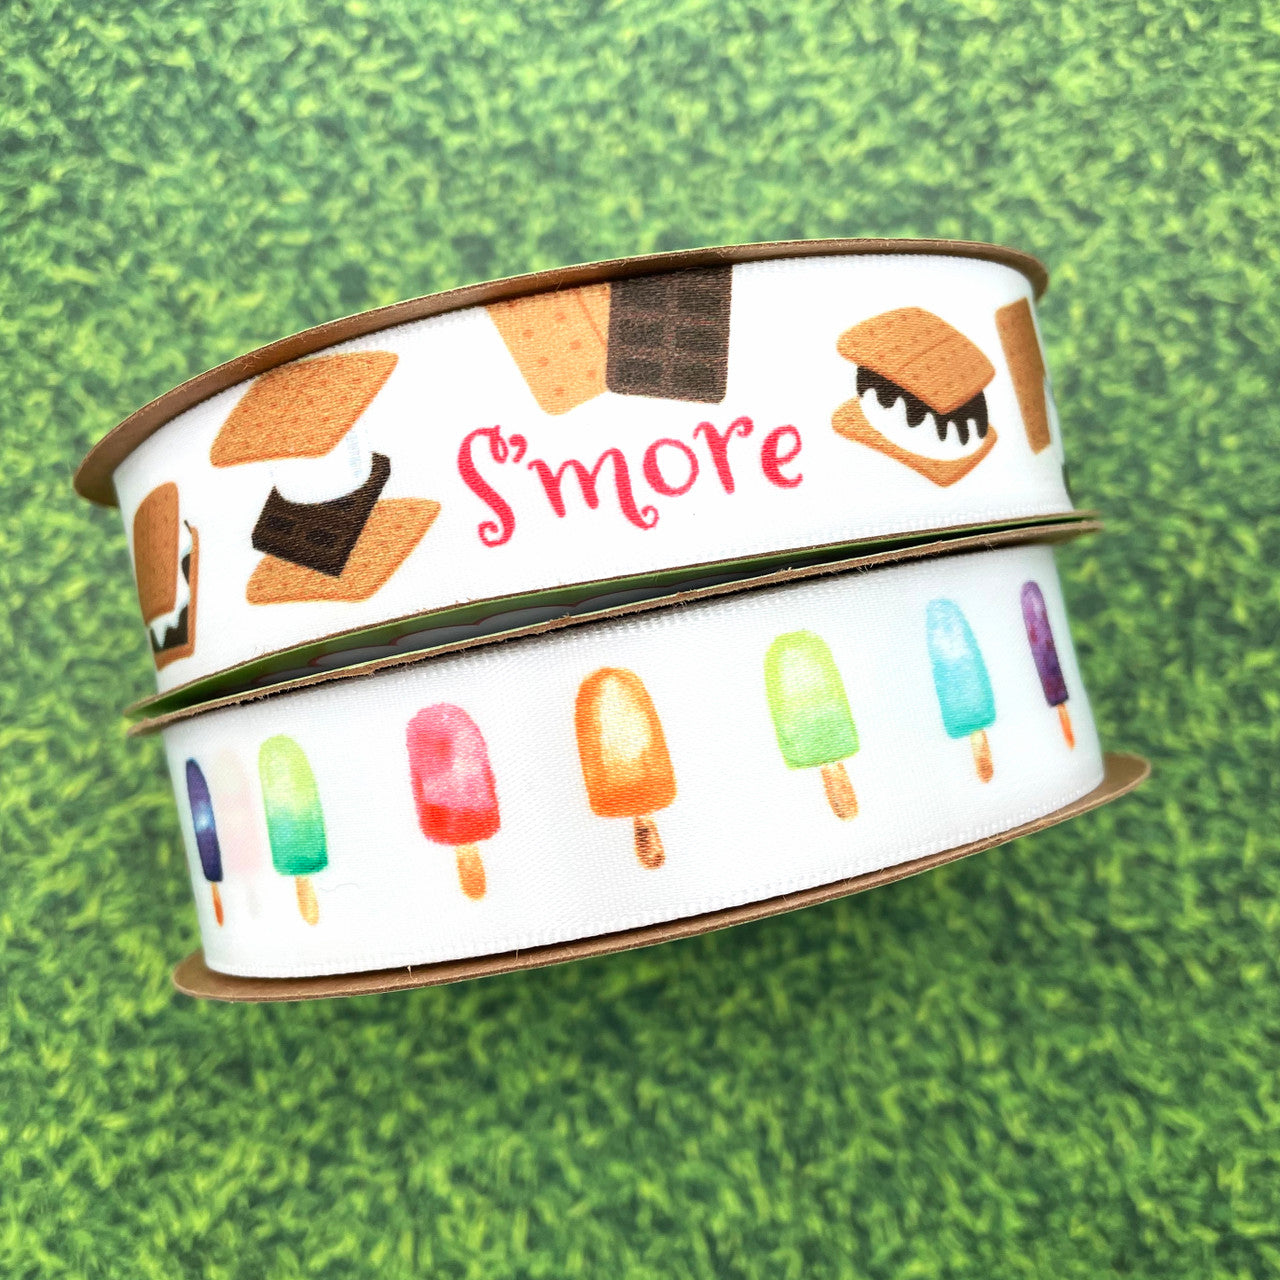 Nothing says Summer like S'mores and popsicles! Be sure to have this yummy combination on hand for your Summer party favors!